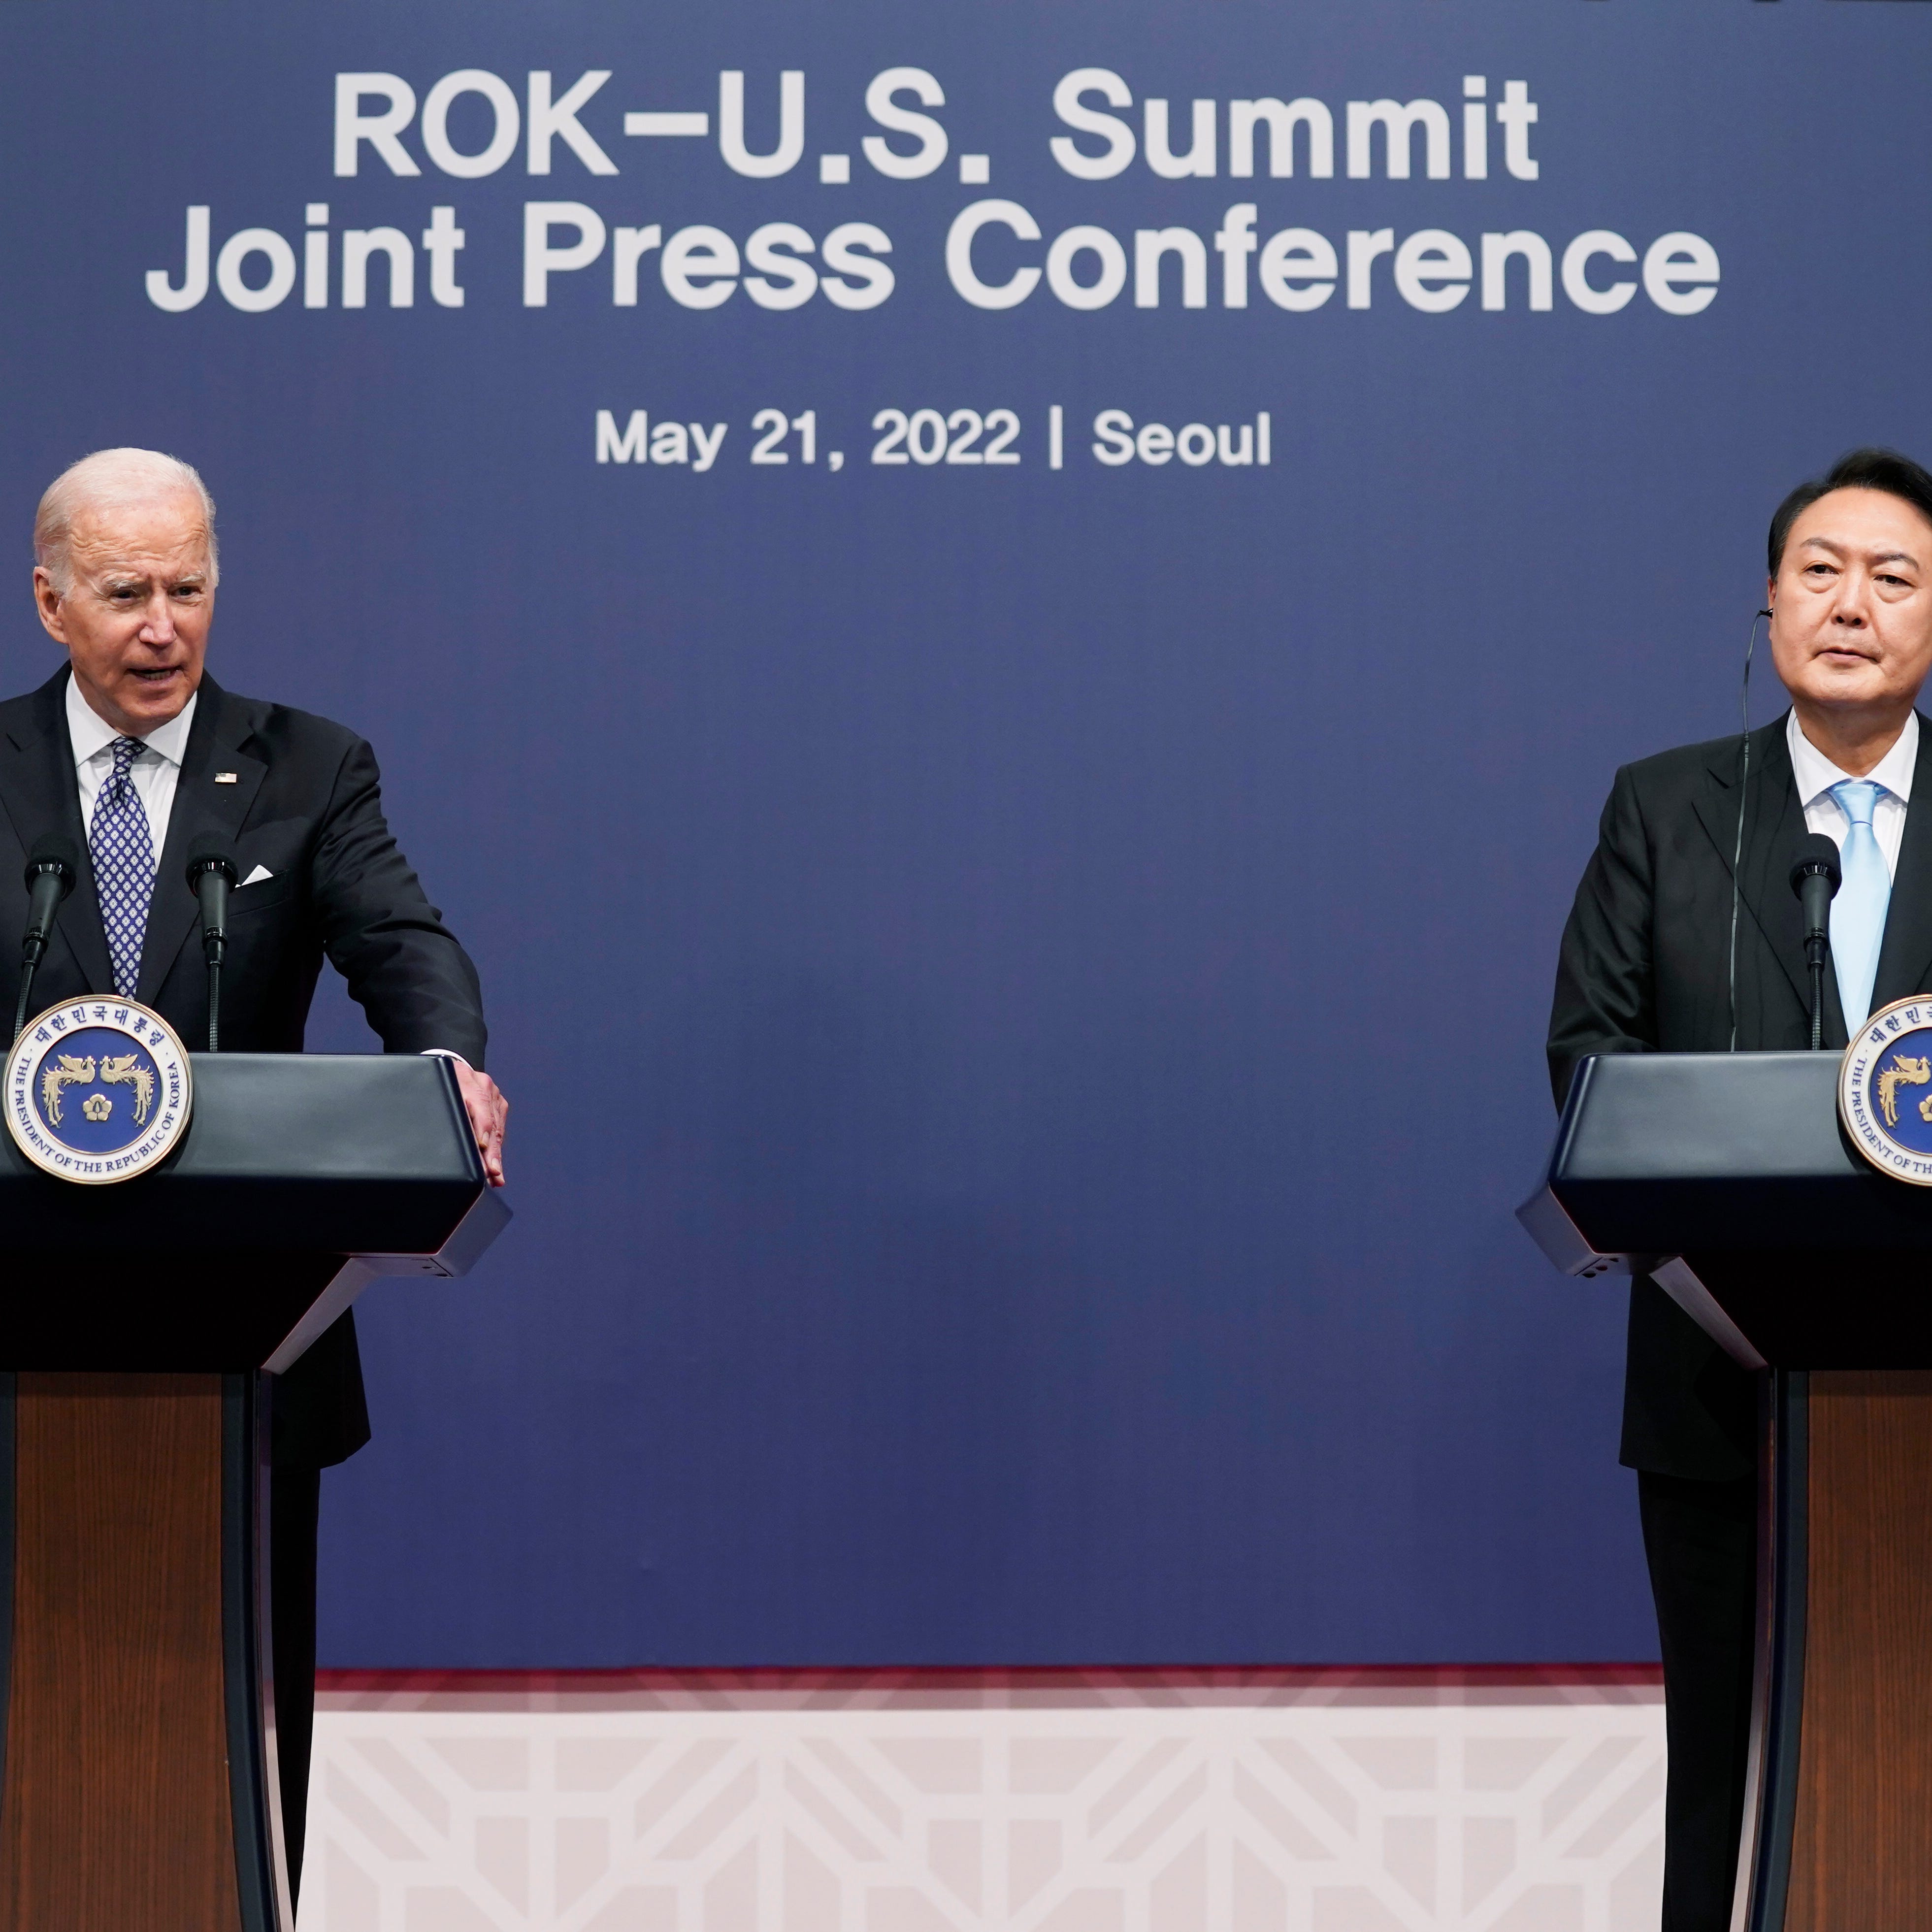 FILE - U.S. President Joe Biden, left, speaks as South Korean President Yoon Suk Yeol listens during a news conference at the People's House inside the Ministry of National Defense on May 21, 2022, in Seoul, South Korea. (AP Photo/Evan Vucci, File) ORG XMIT: XSEL101